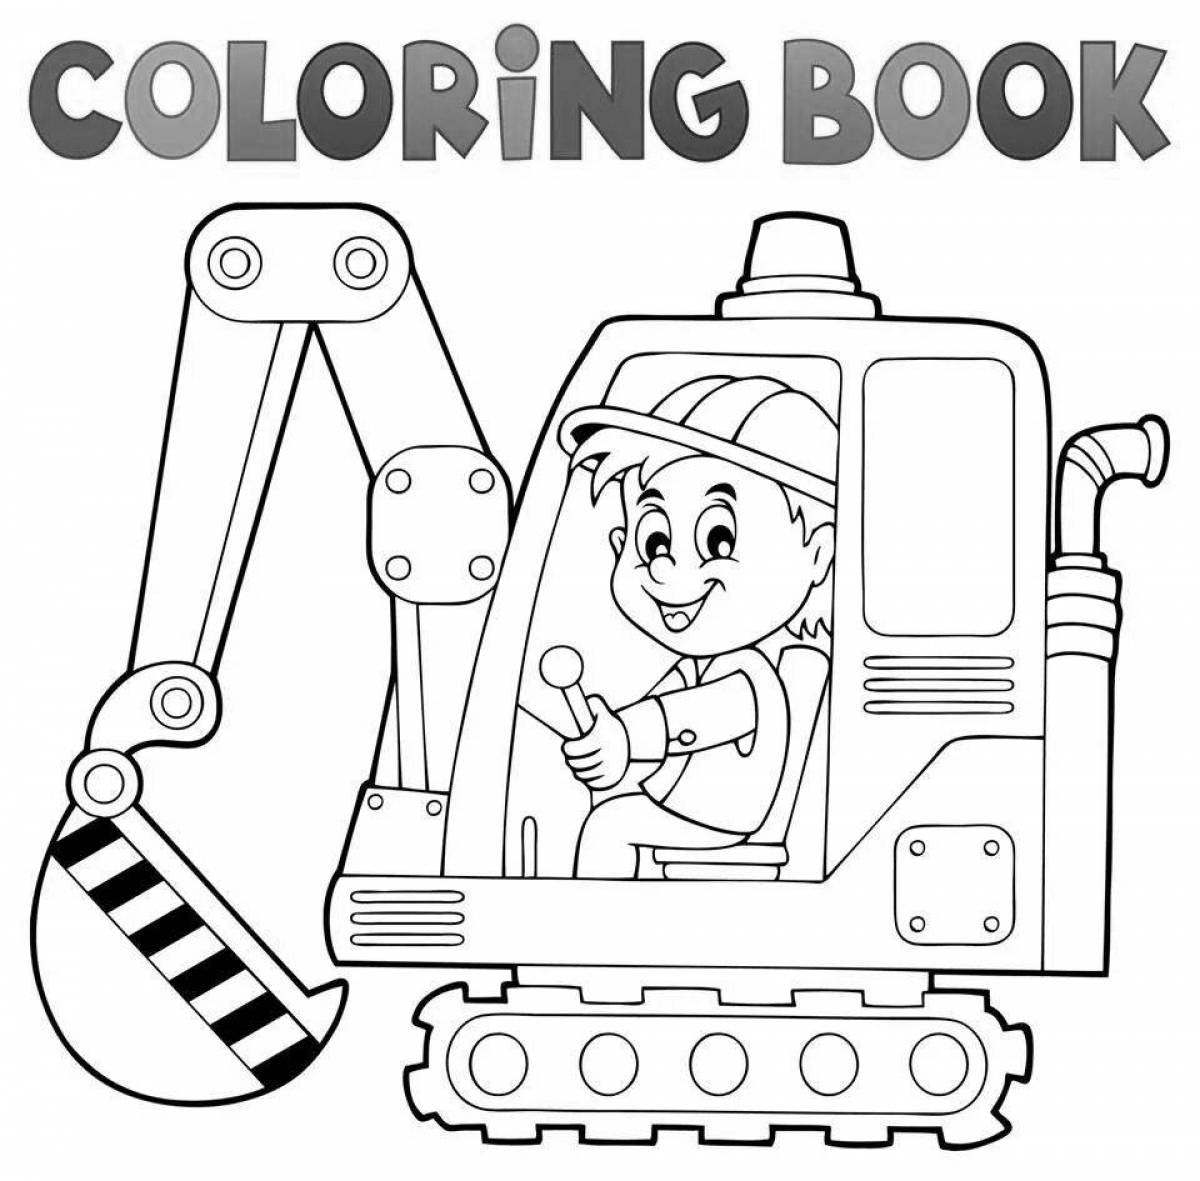 Coloring book of a subway worker